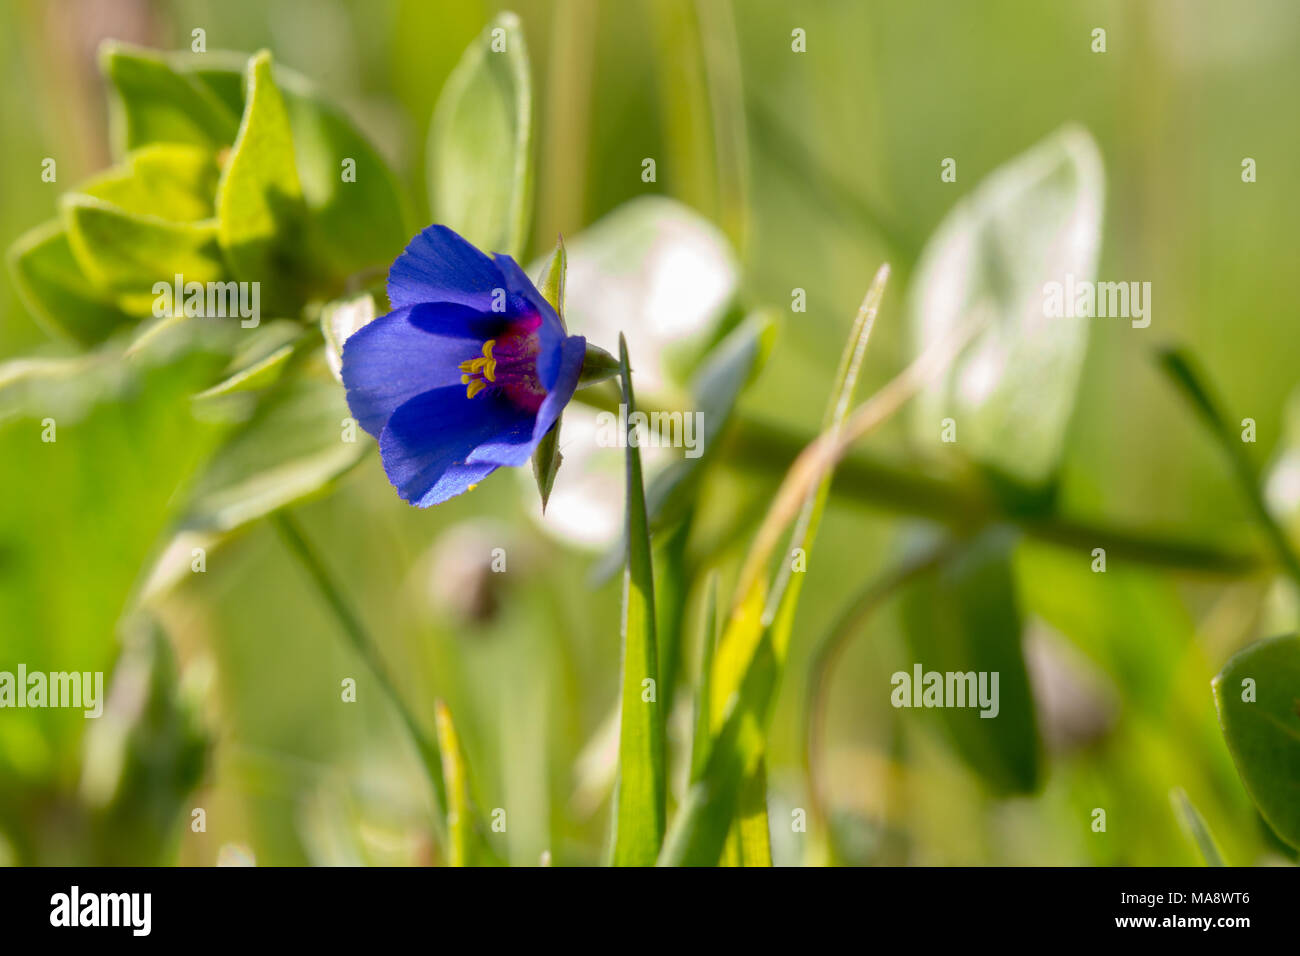 Anagallis arvensis f. azurea, the blue form of the scarlet pimpernel, groing in central Crete, Greece. Stock Photo